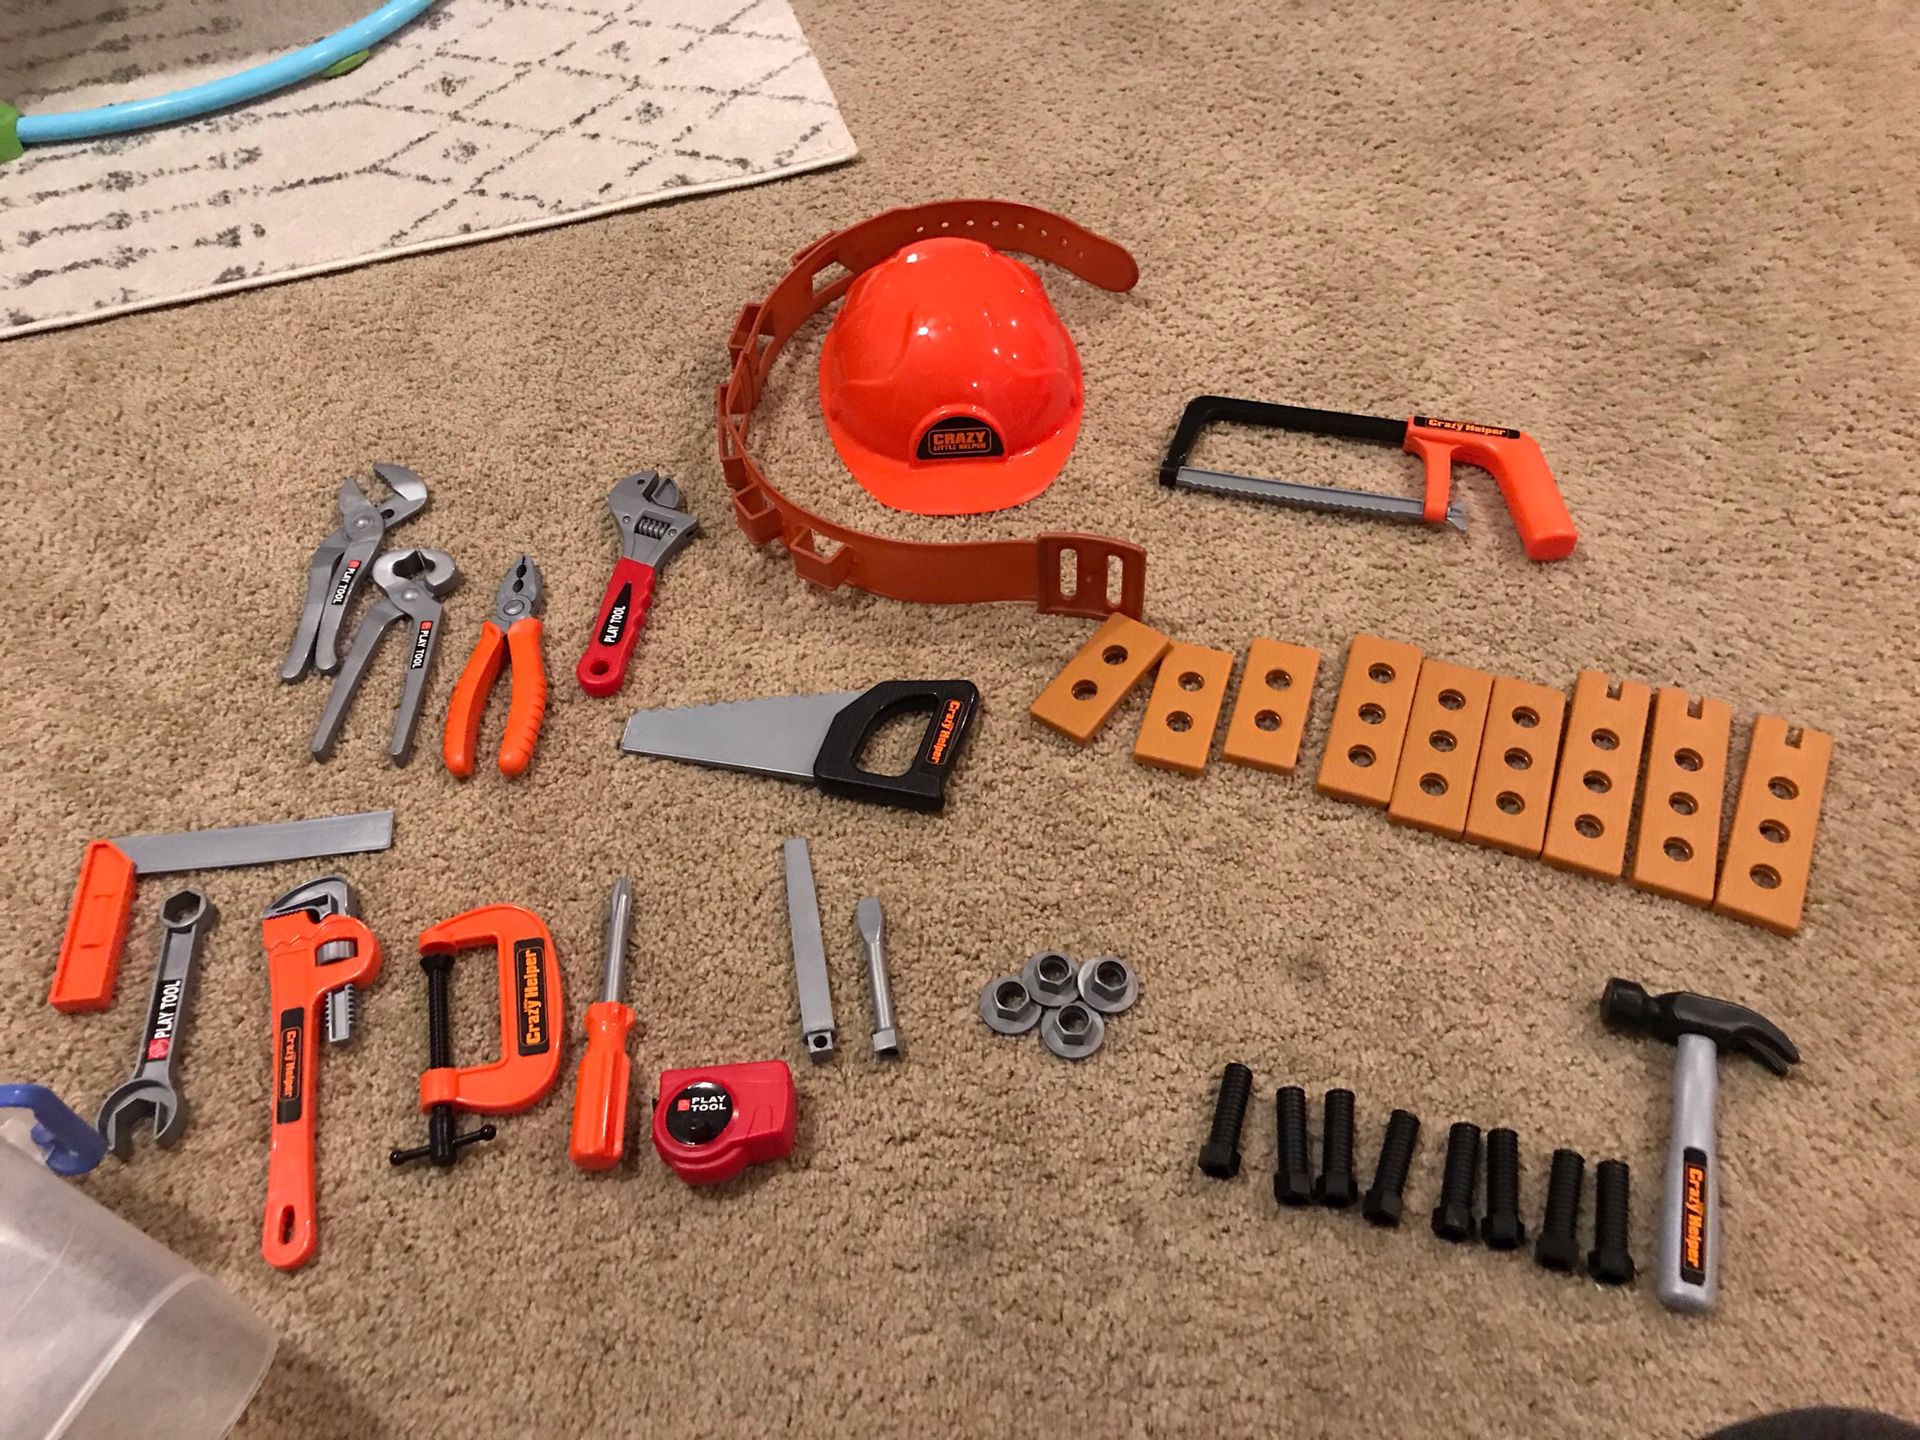 Kid tool set - perfect for pretend play